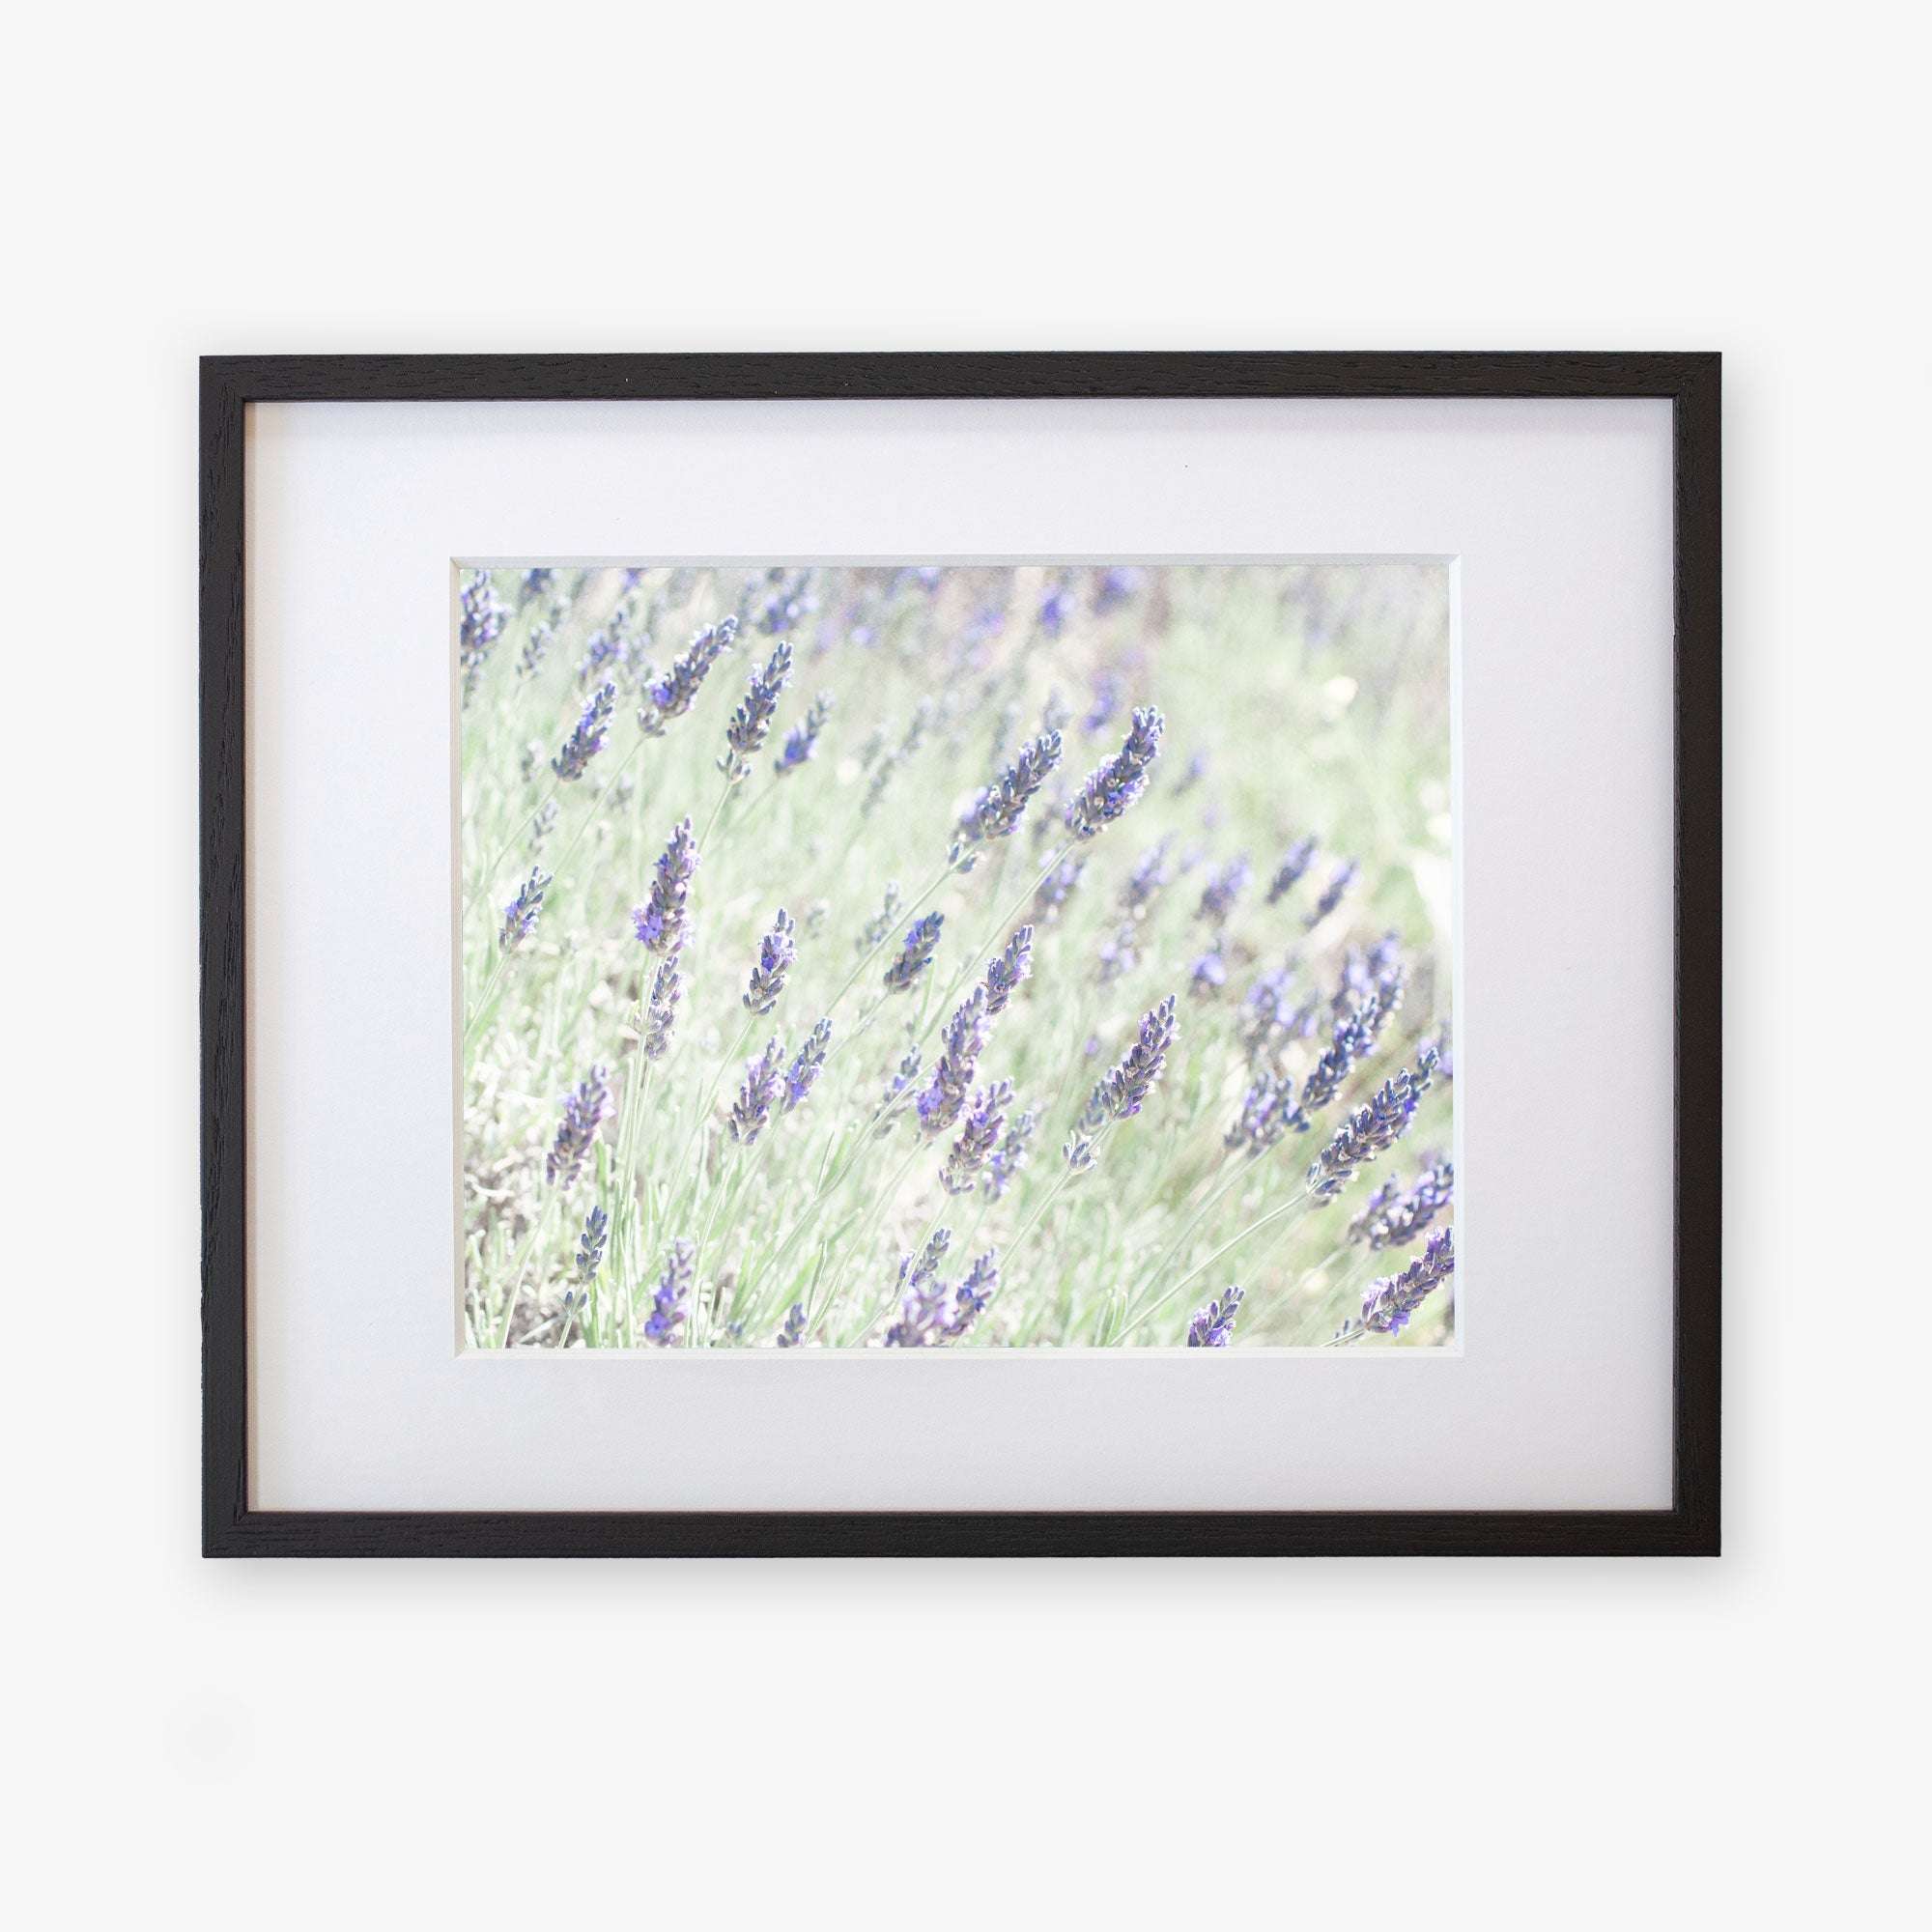 A framed photograph of Floral Purple Print, &#39;Lavender for LaLa&#39; flowers, showcasing vibrant purple blossoms against a soft-focus green background, printed on archival photographic paper. The frame is simple, black, with a white mat border. Created by Offley Green.